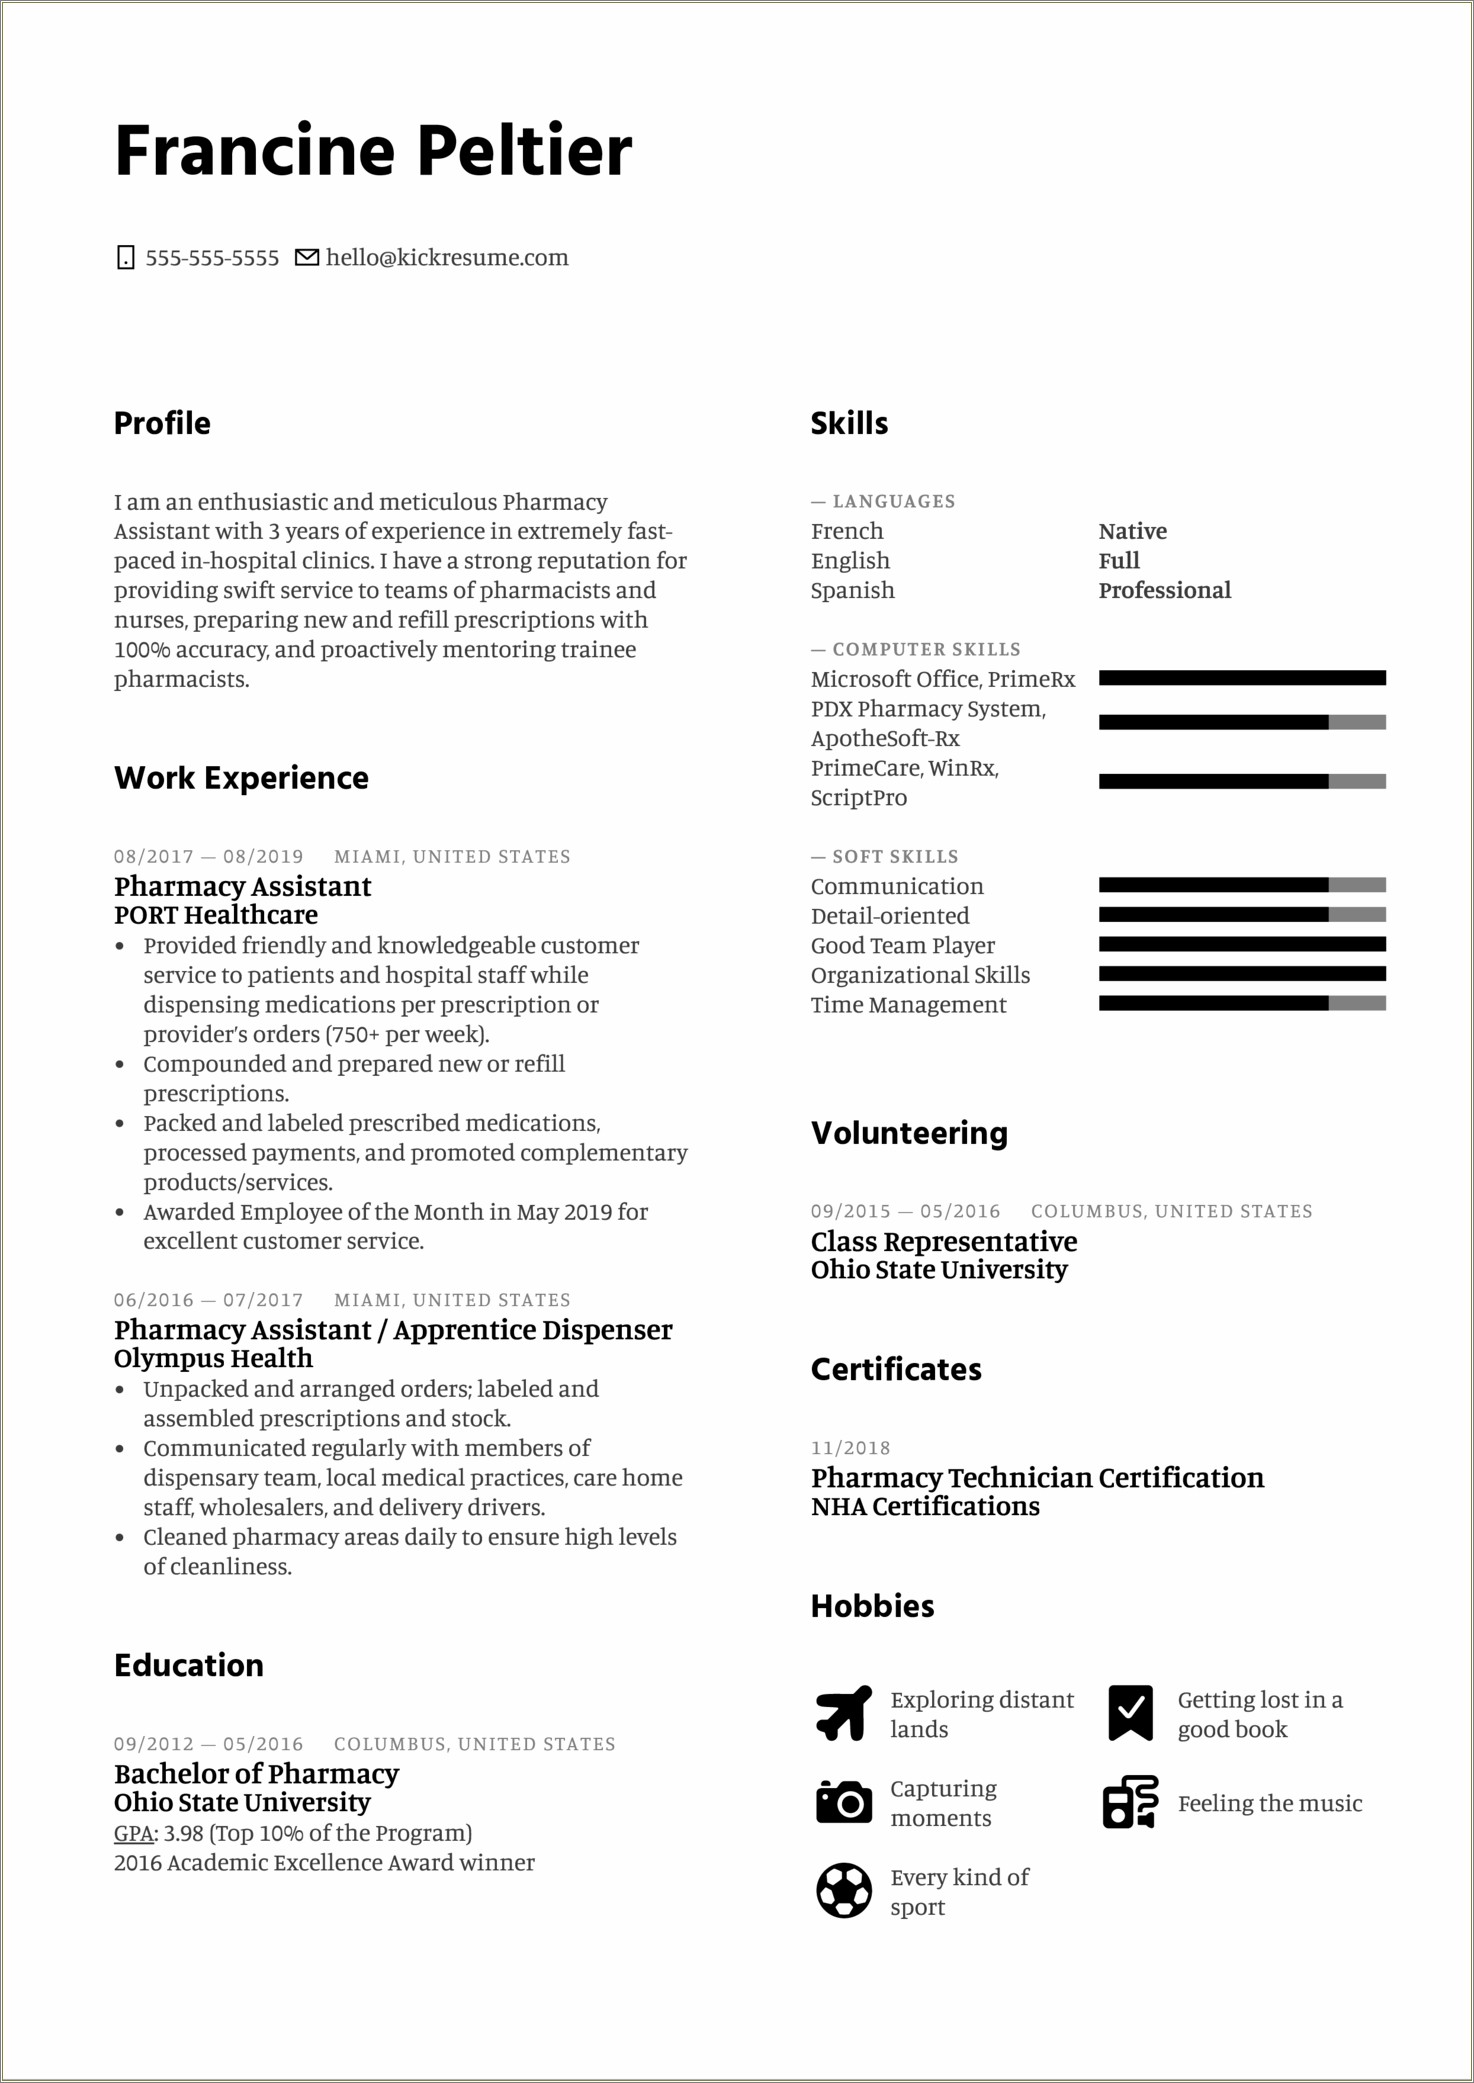 Job Resume Objective For Medical Assistant